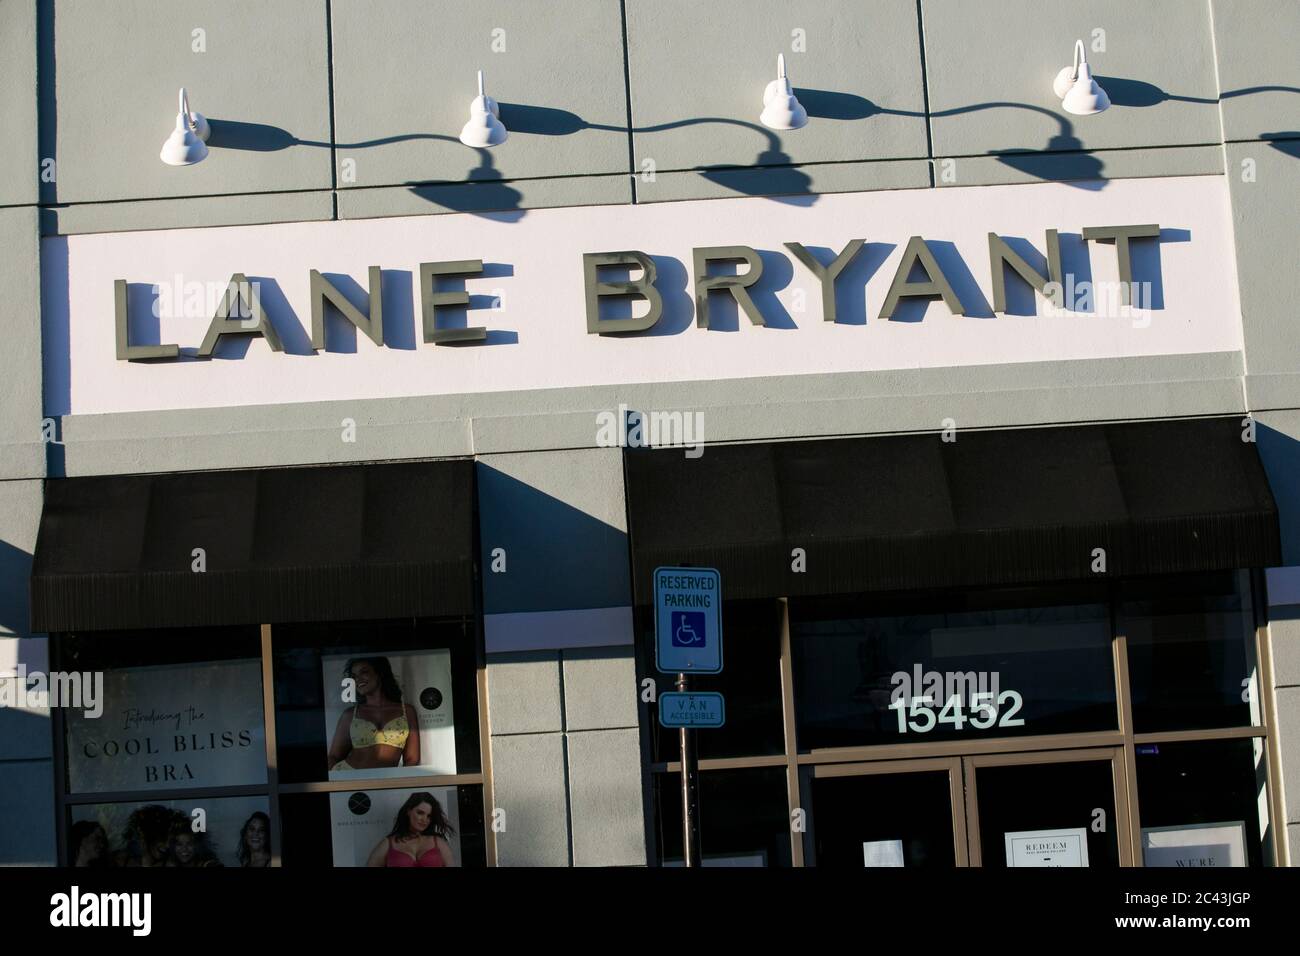 List Of Lane Bryant Stores To Be Closed In New England